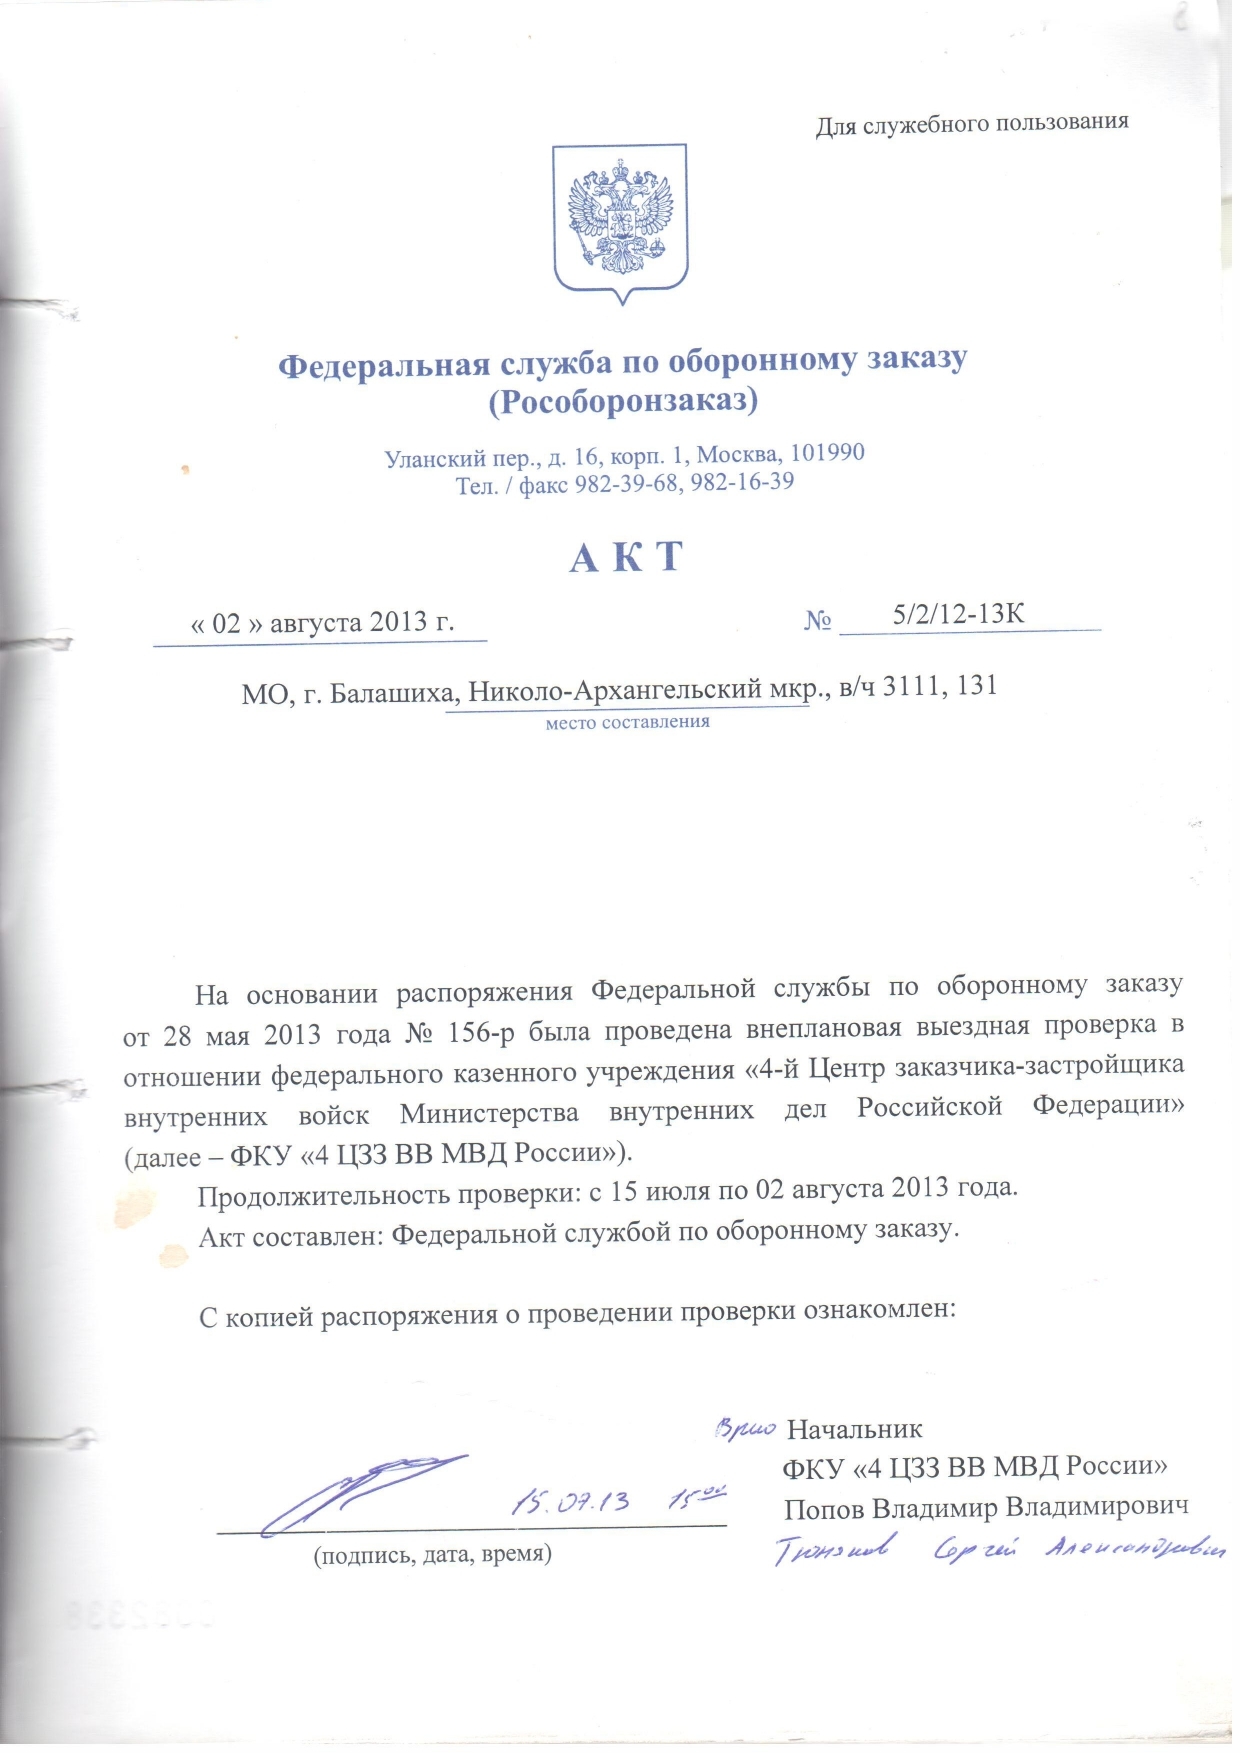 Russian Guard: expensive square meters, defrauded investors, luxury cars - Rosgvardia, Ministry of Internal Affairs, Government purchases, Lodging, Building, Balashikha, Bribe, Longpost